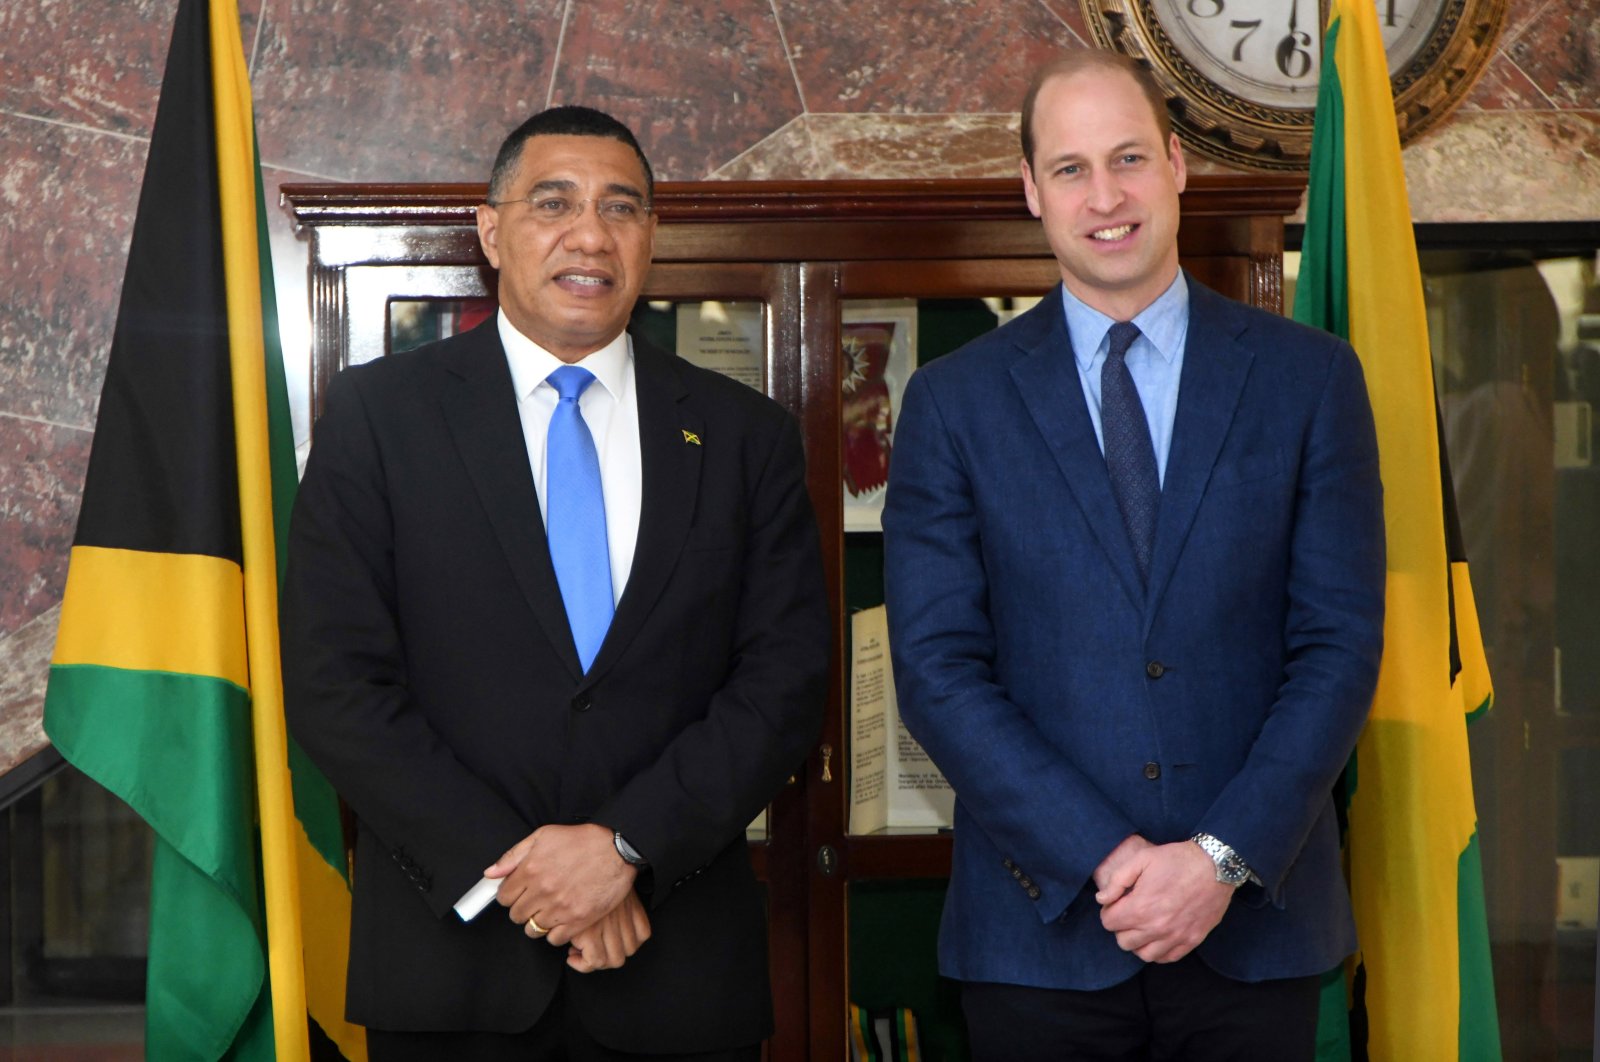 Britain&#039;s Prince William (R) and Jamaican Prime Minister Andrew Holness (L) during a meeting at the residence of the Jamaican prime minister in Kingston, Jamaica, March 23, 2022. (EPA Photo)